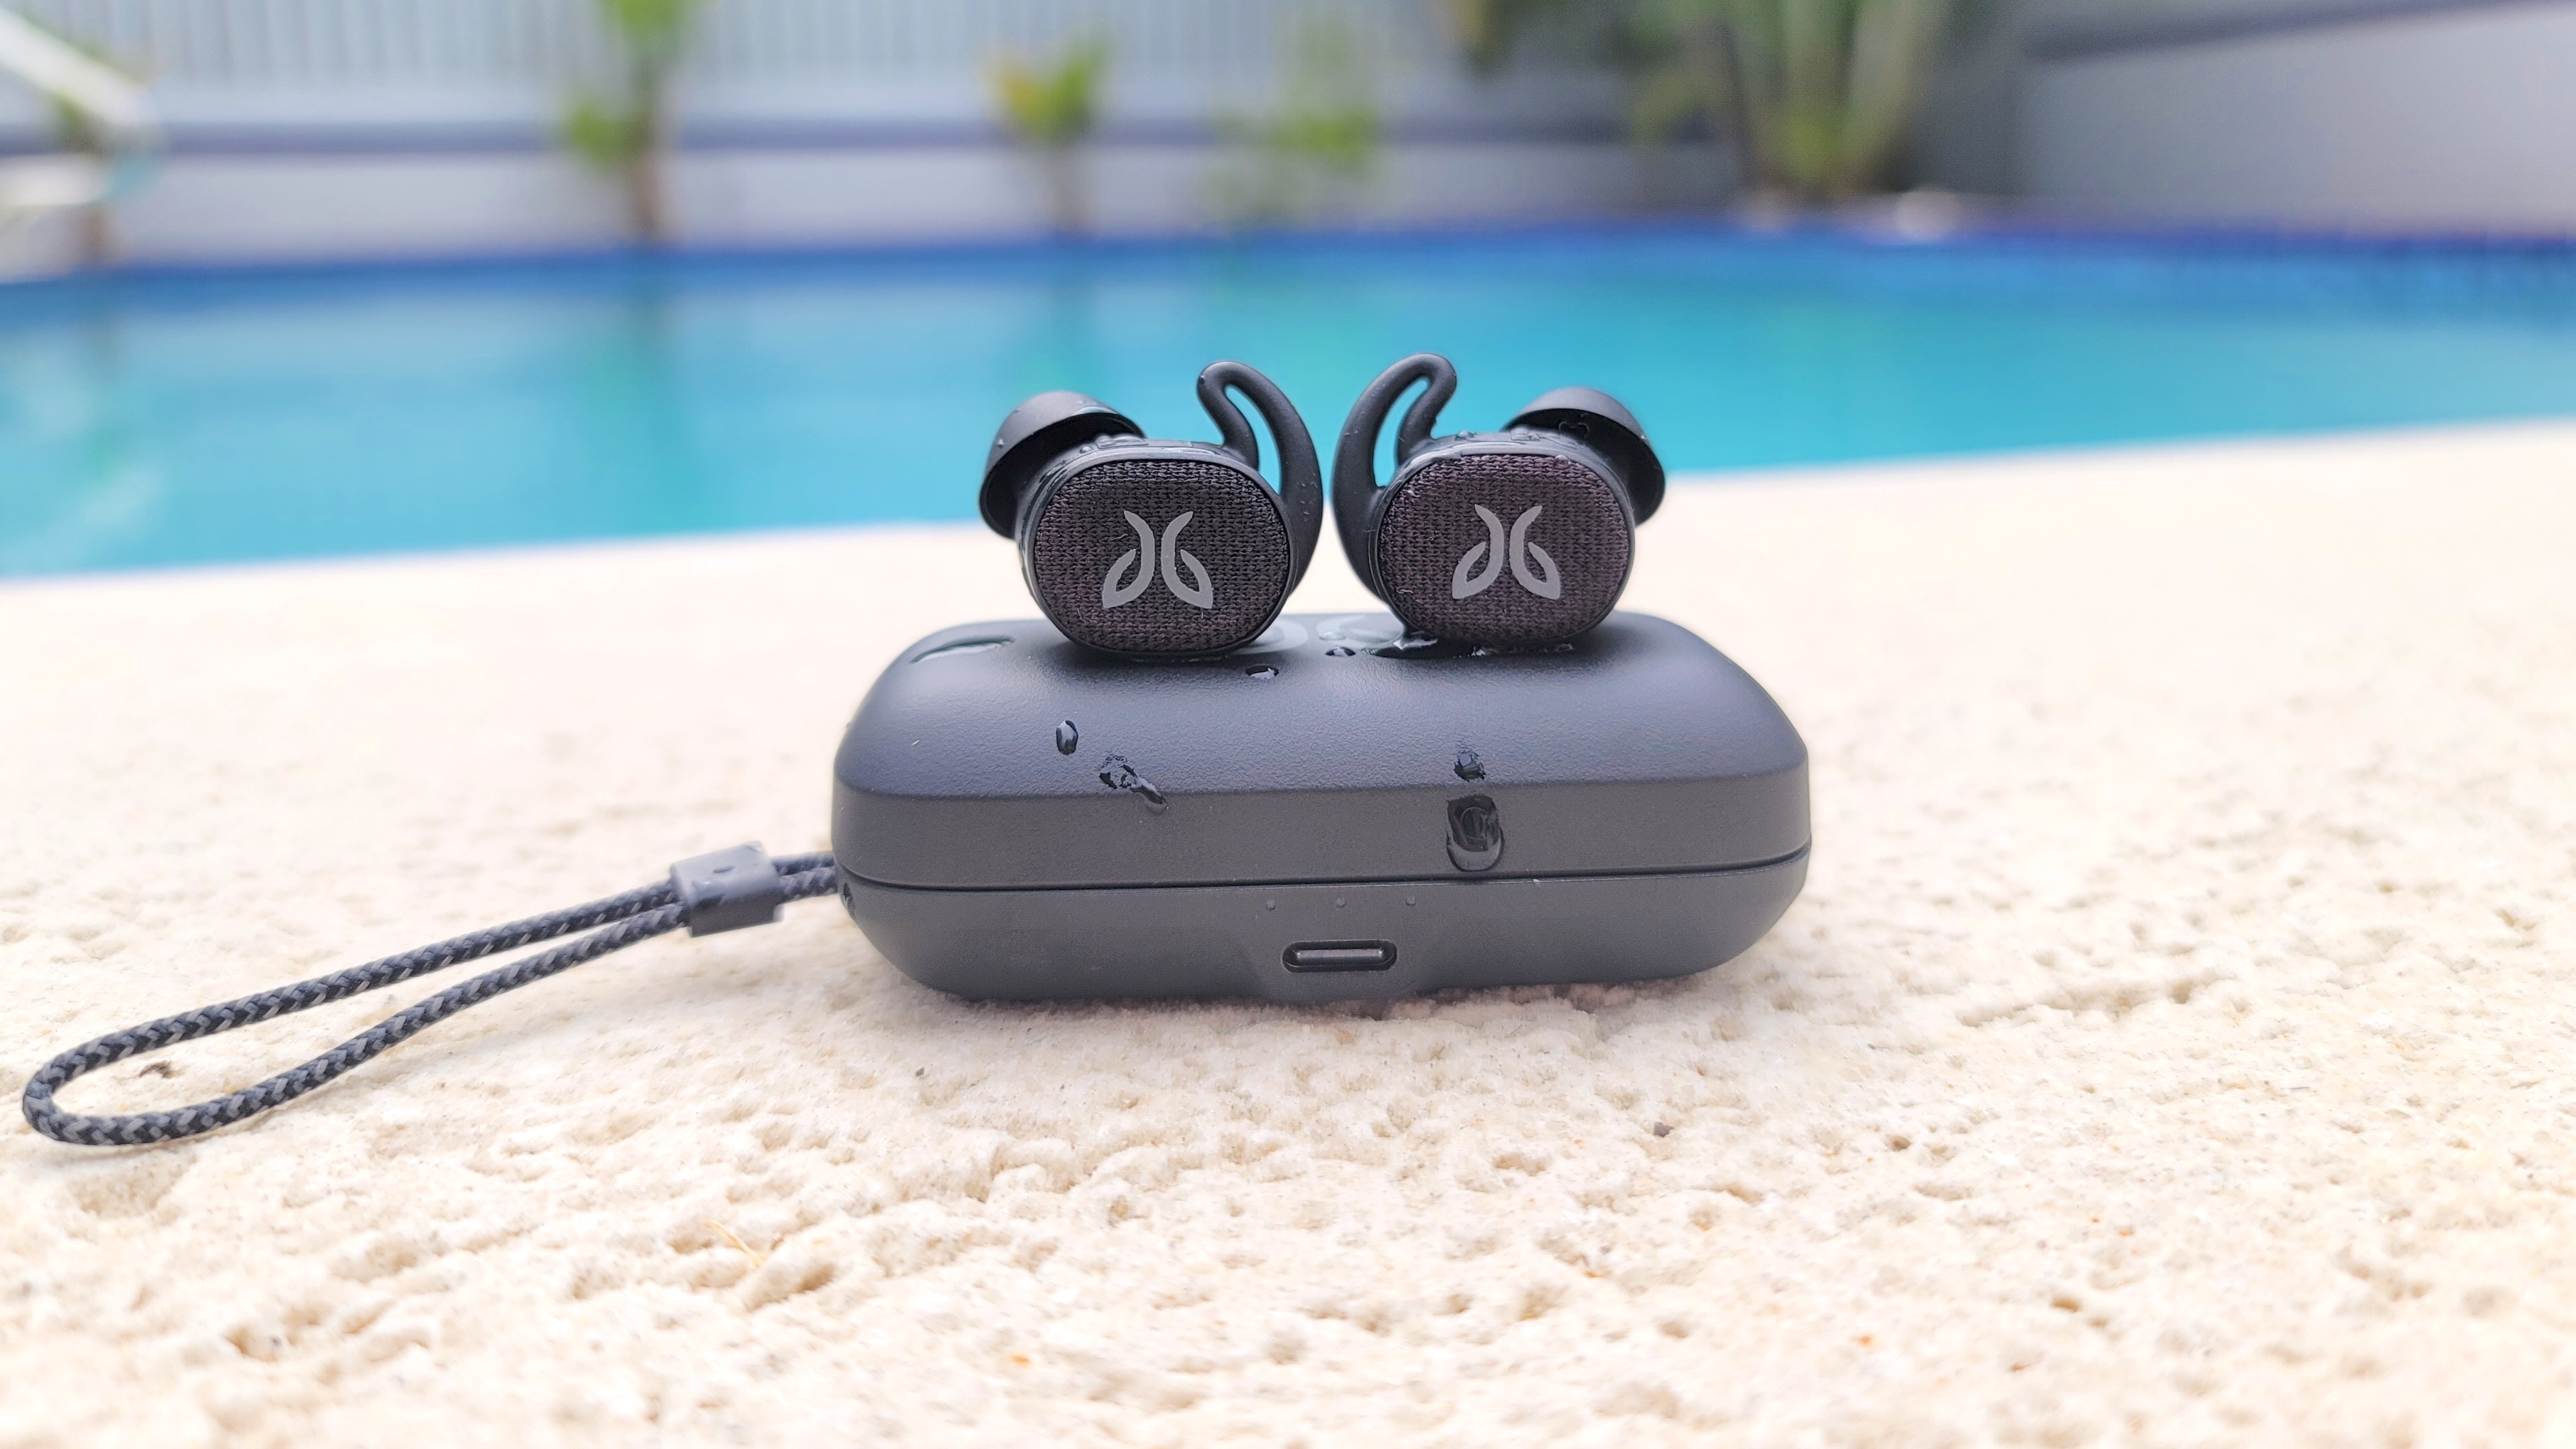 Testing water resistance on the Jaybird Vista 2 wireless earbuds and charging case